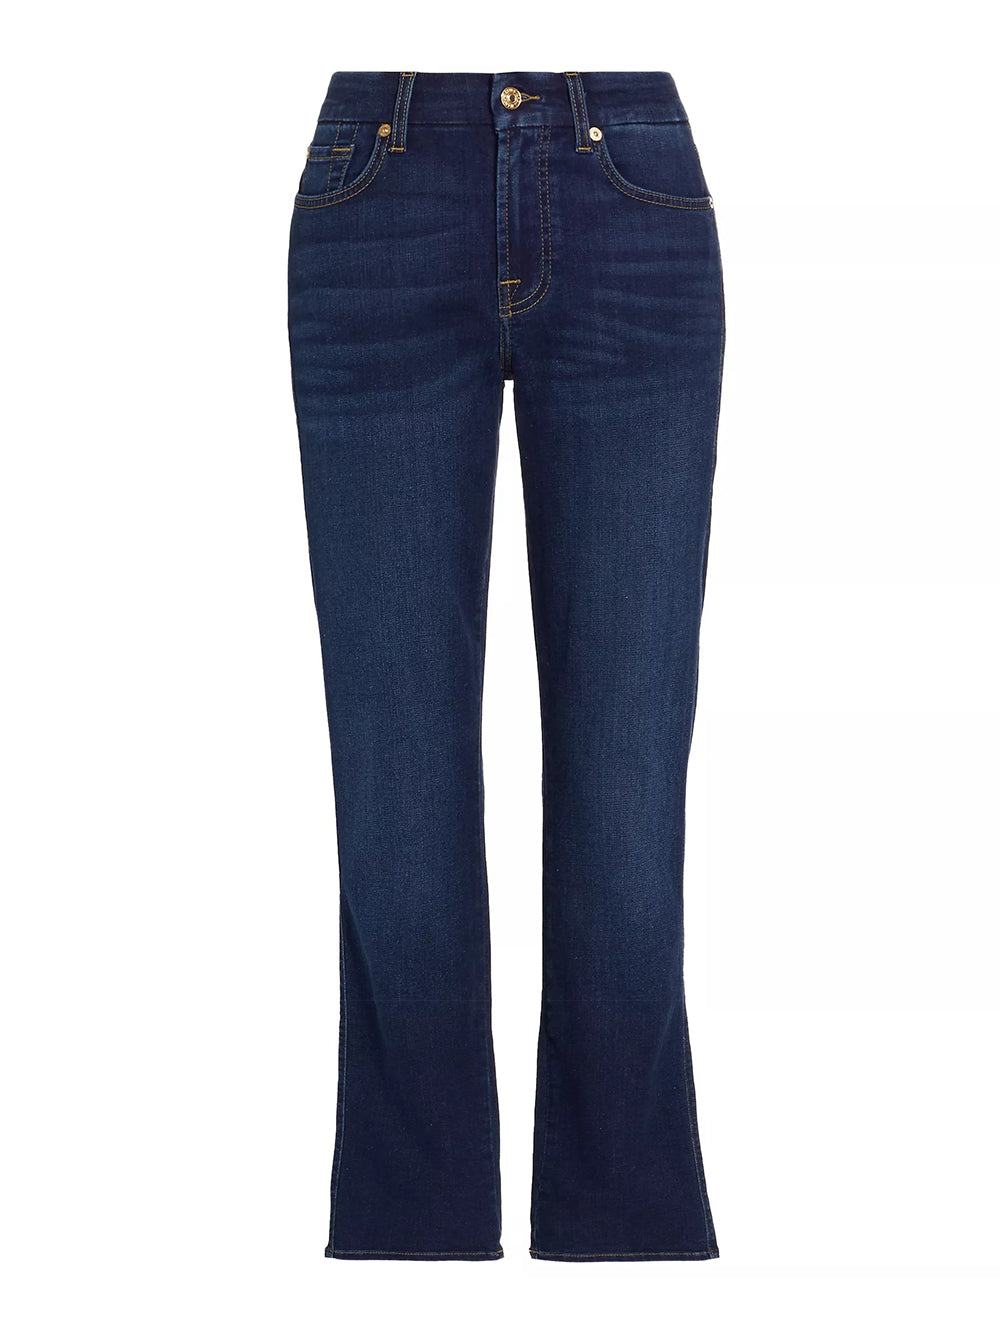 7 For All Mankind Kimmie Straight Jean in Indigo Rinse